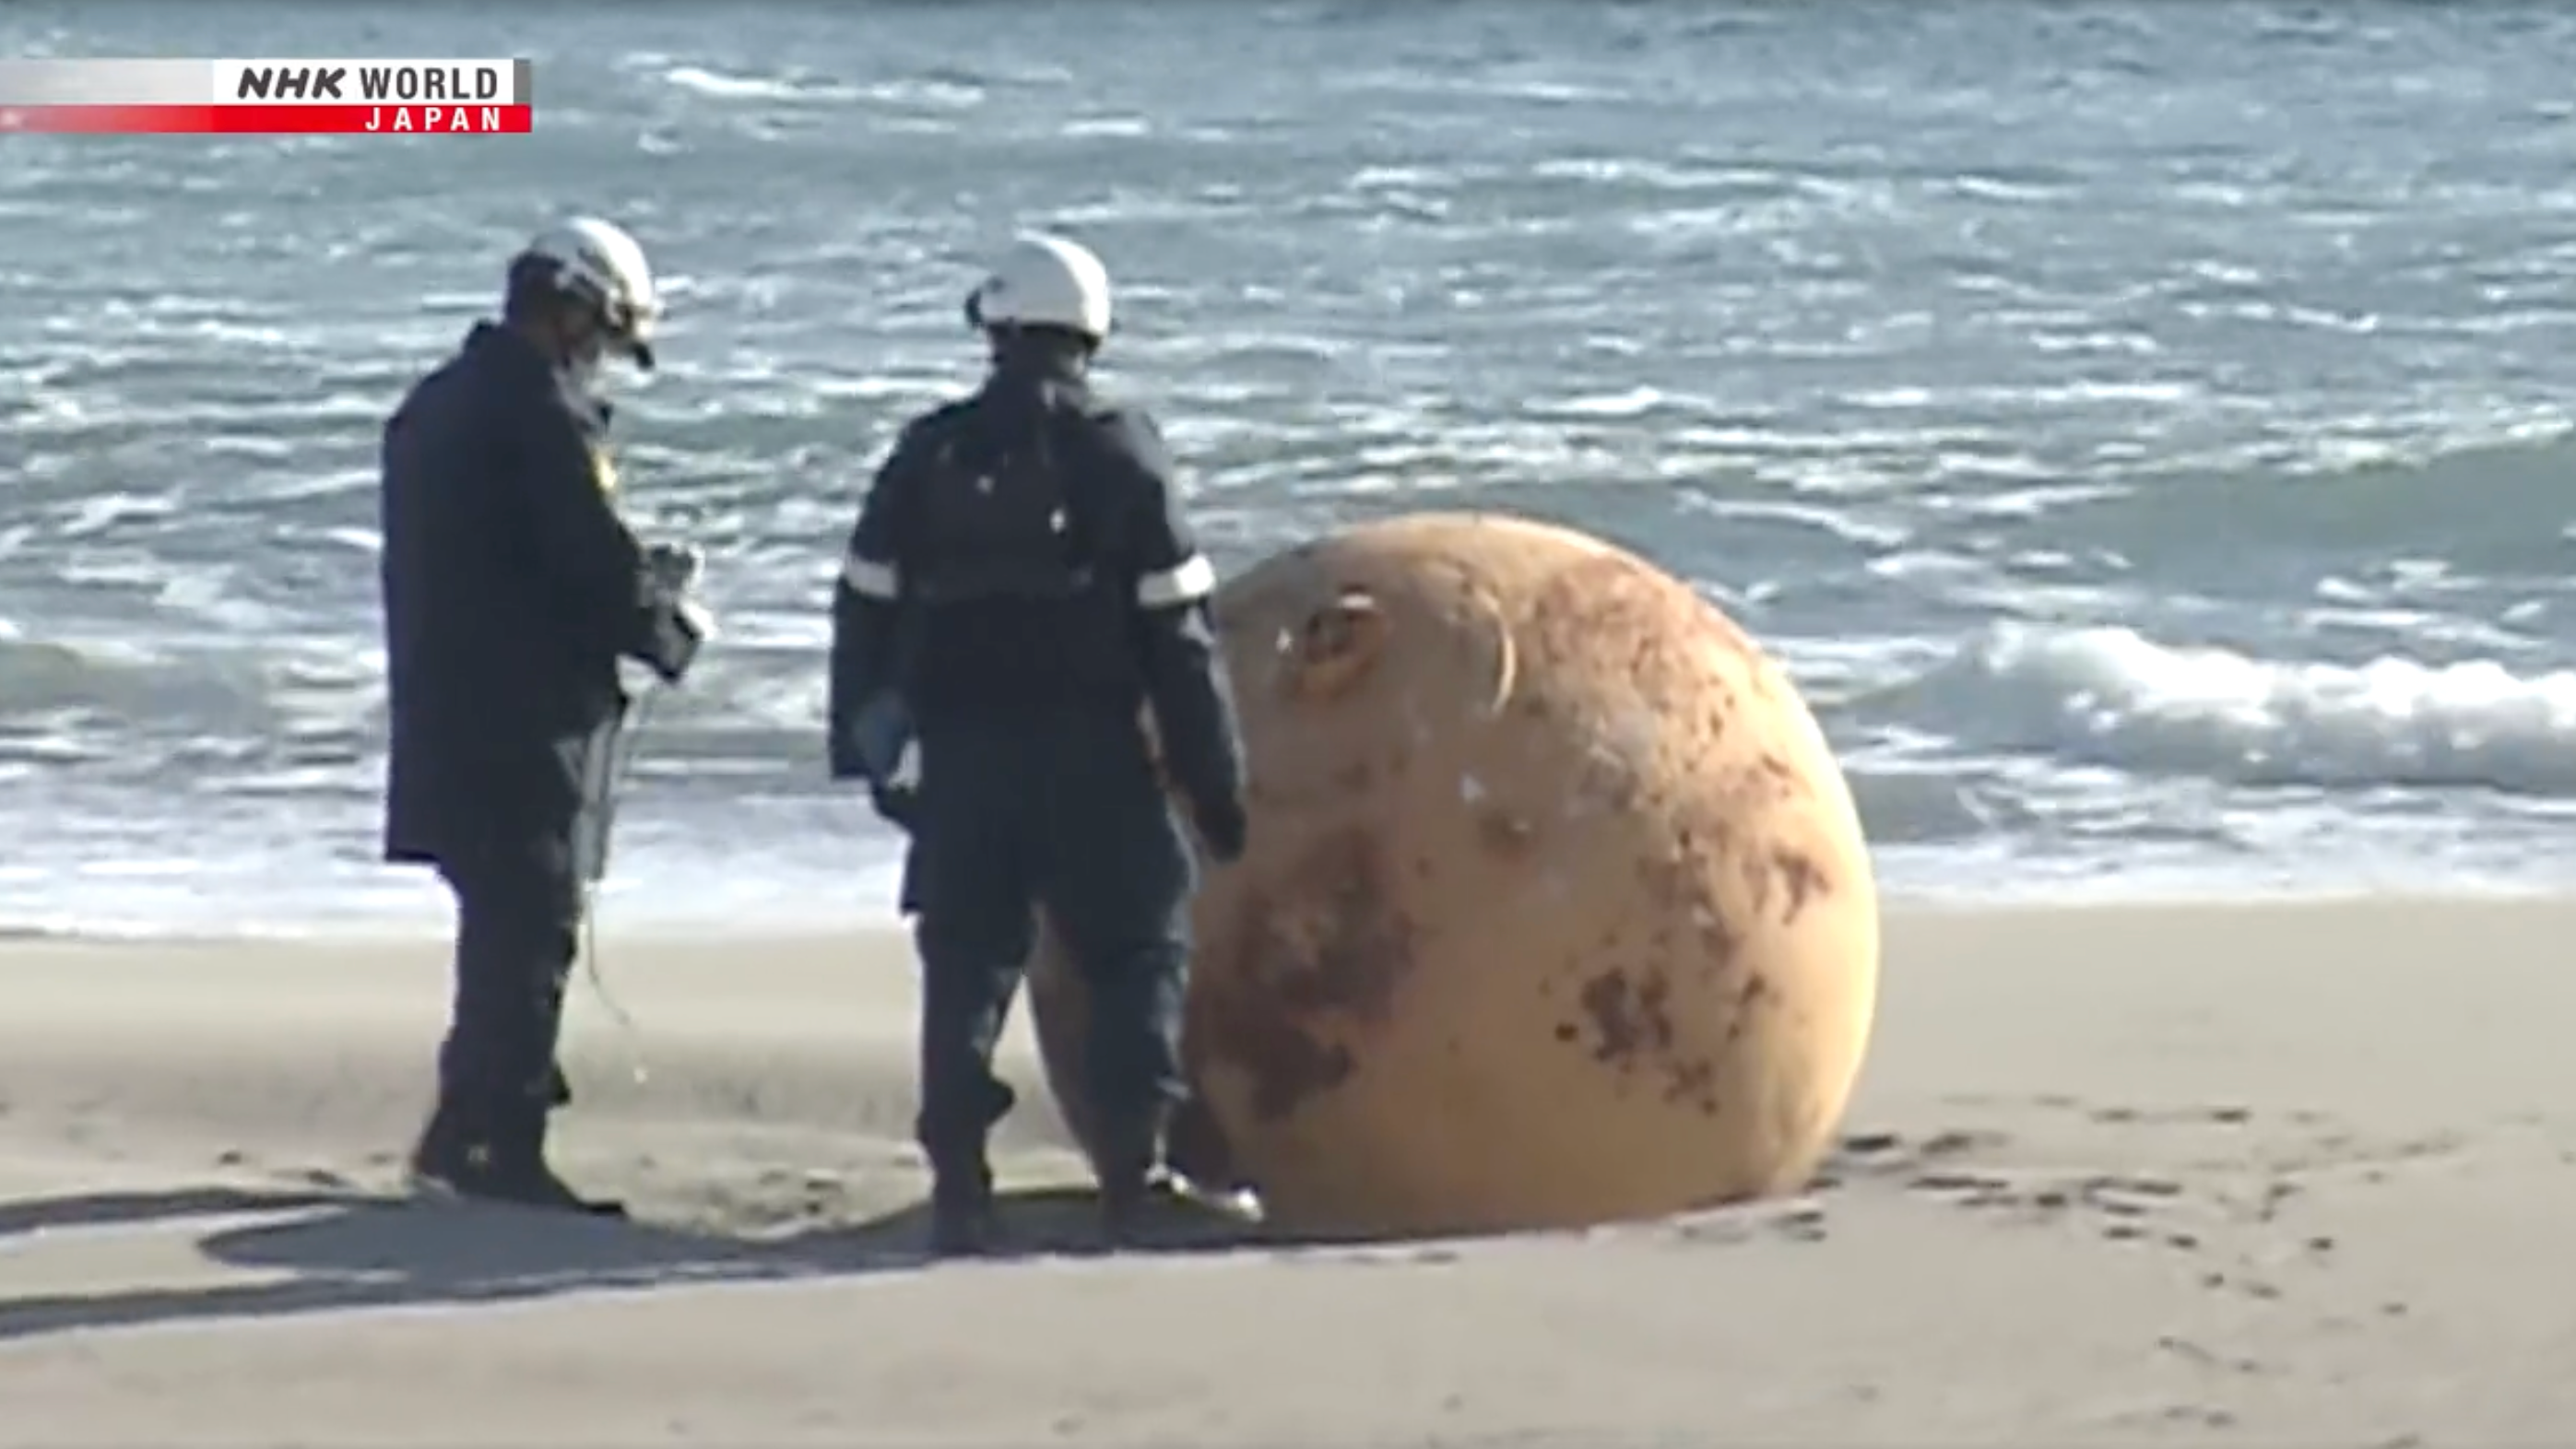 China Beach Tv Show Porn - Conspiracy theories fly as Japanese officials investigate mysterious metal  ball washed up on beach | ITV News